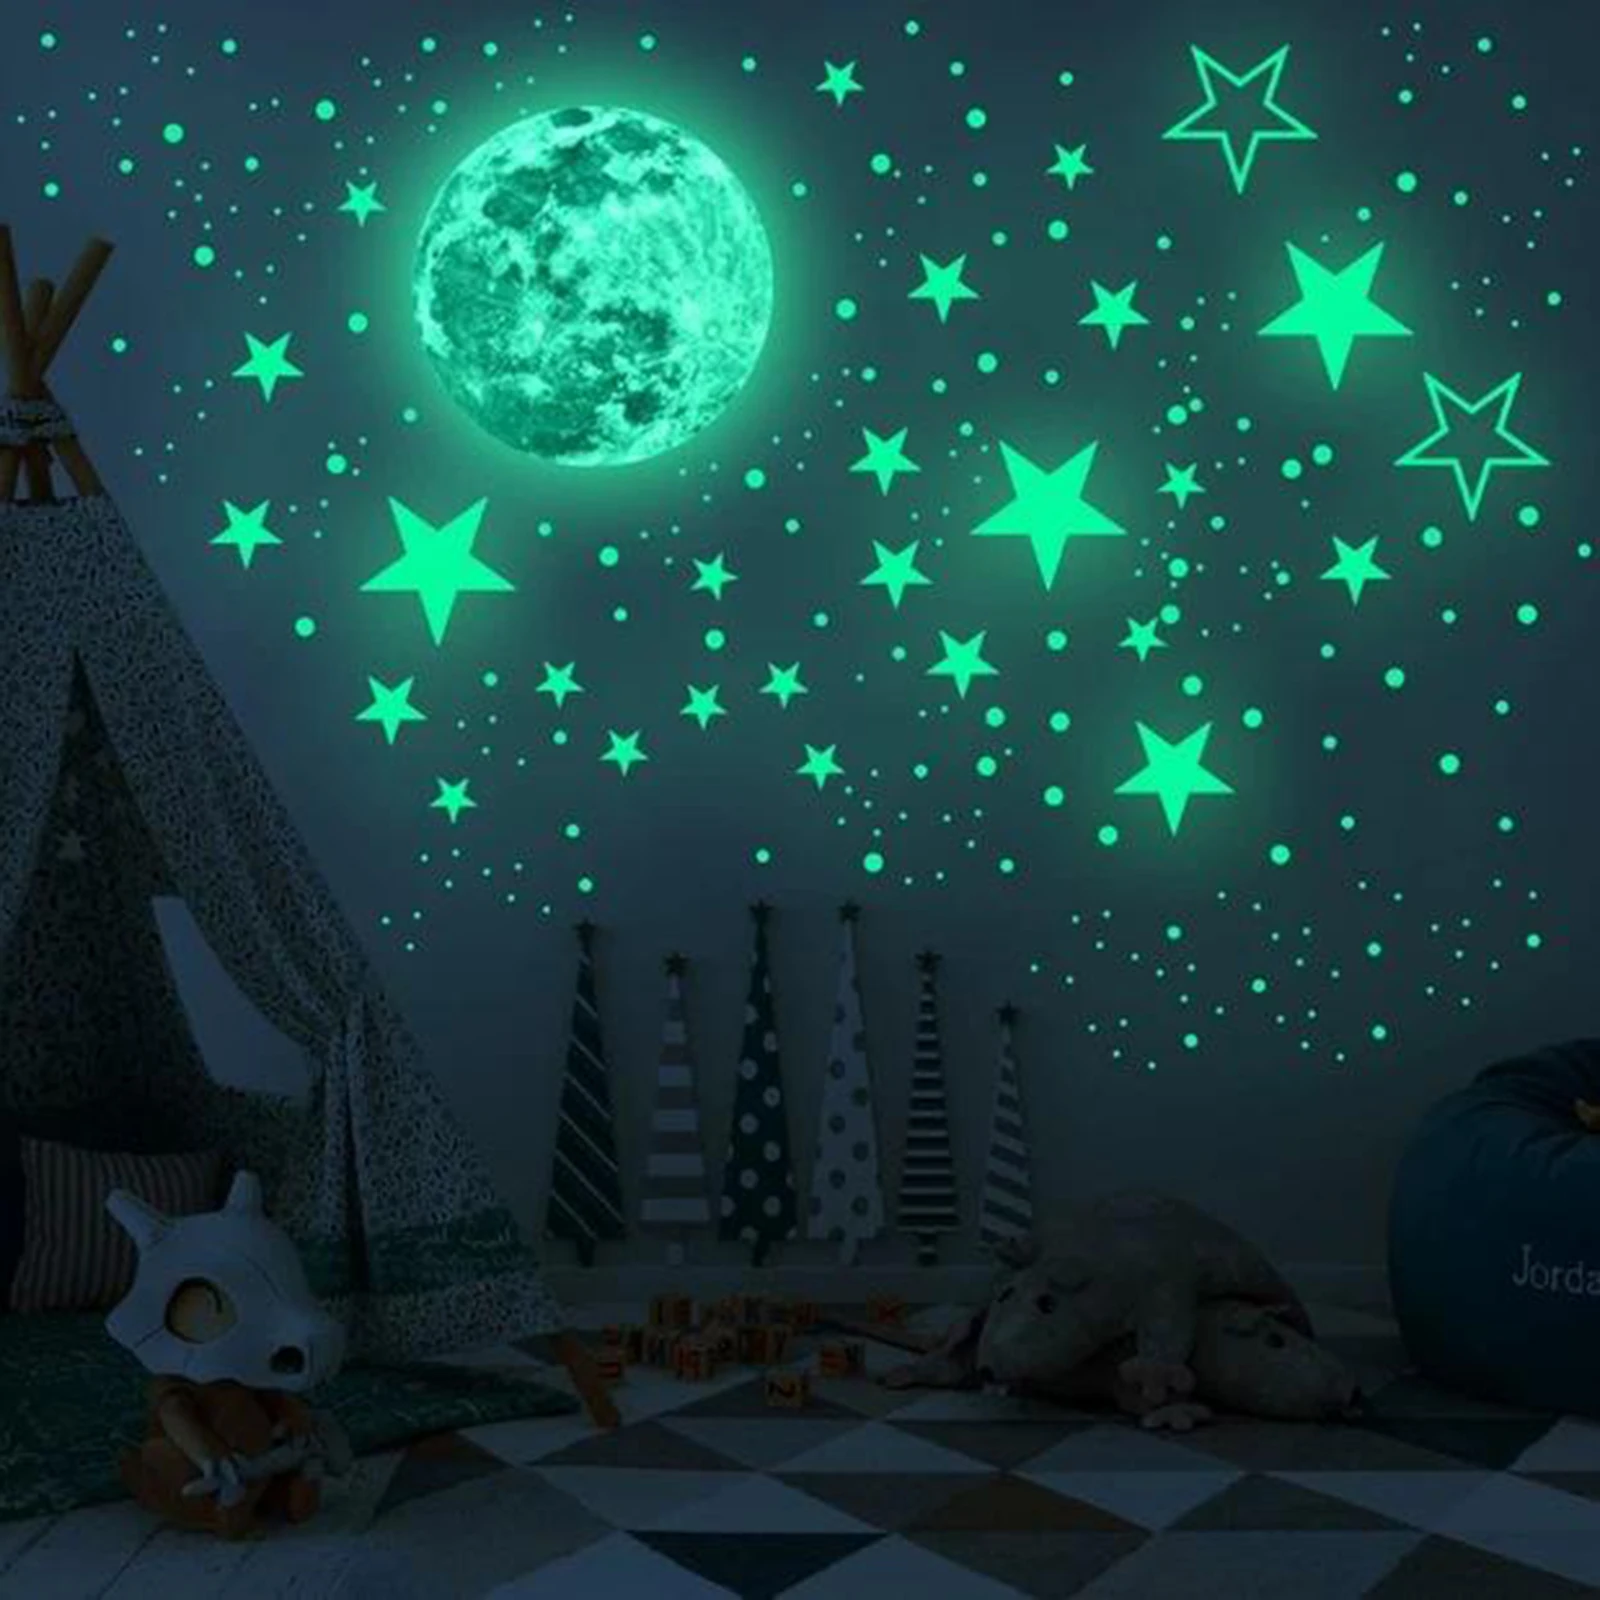 435Pcs 3D Star and Moon Planets Glow In the dark Luminous on Wall Stickers for Ceiling Kids Room Living Room Decal Decorations